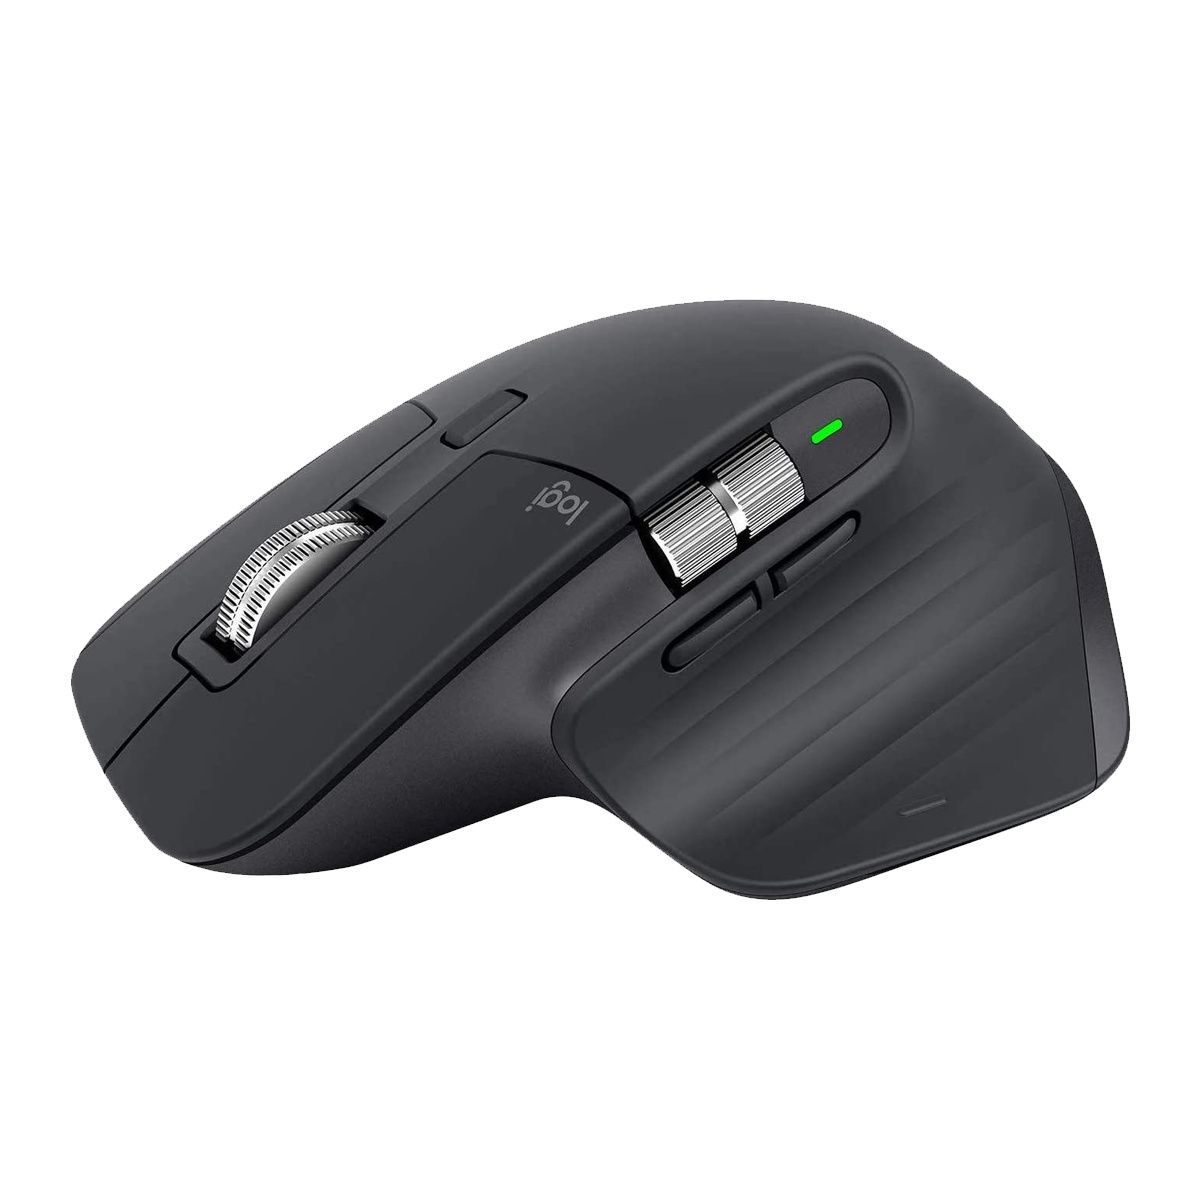 The Logitech MX Master 3 is undoubtedly one of the best mice you can get right now. It has a premium-feeling metal wheel, a high-end sensor that even works on glass, and a comfortable design. It works wirelessly with Bluetooth or the included dongle.